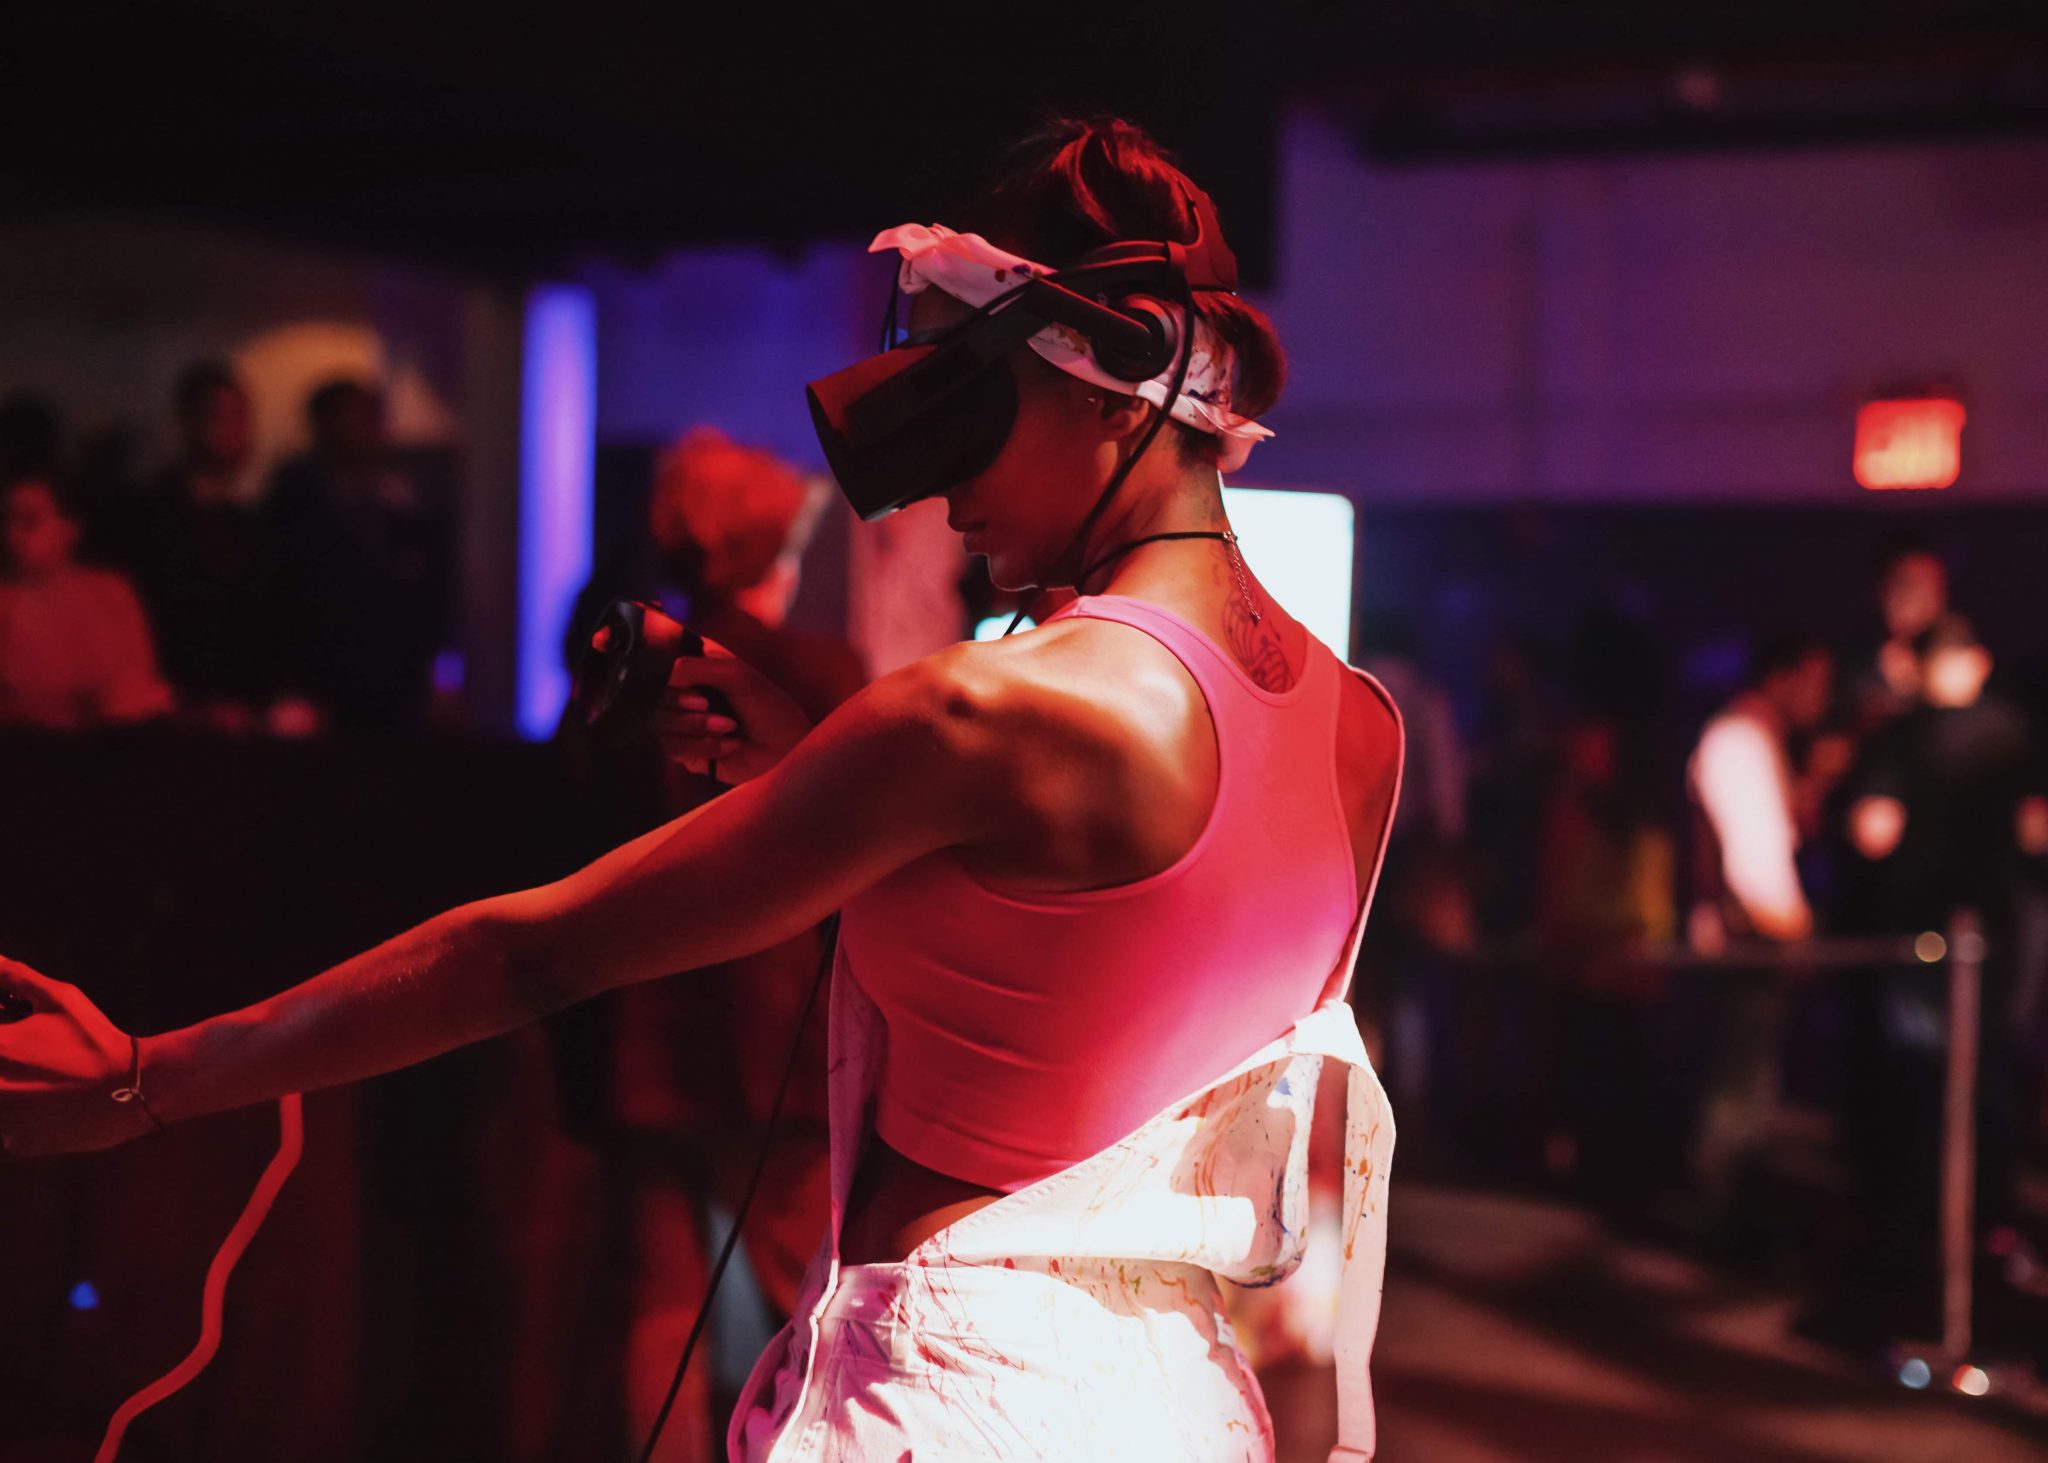 VR experience for hennessy product launch